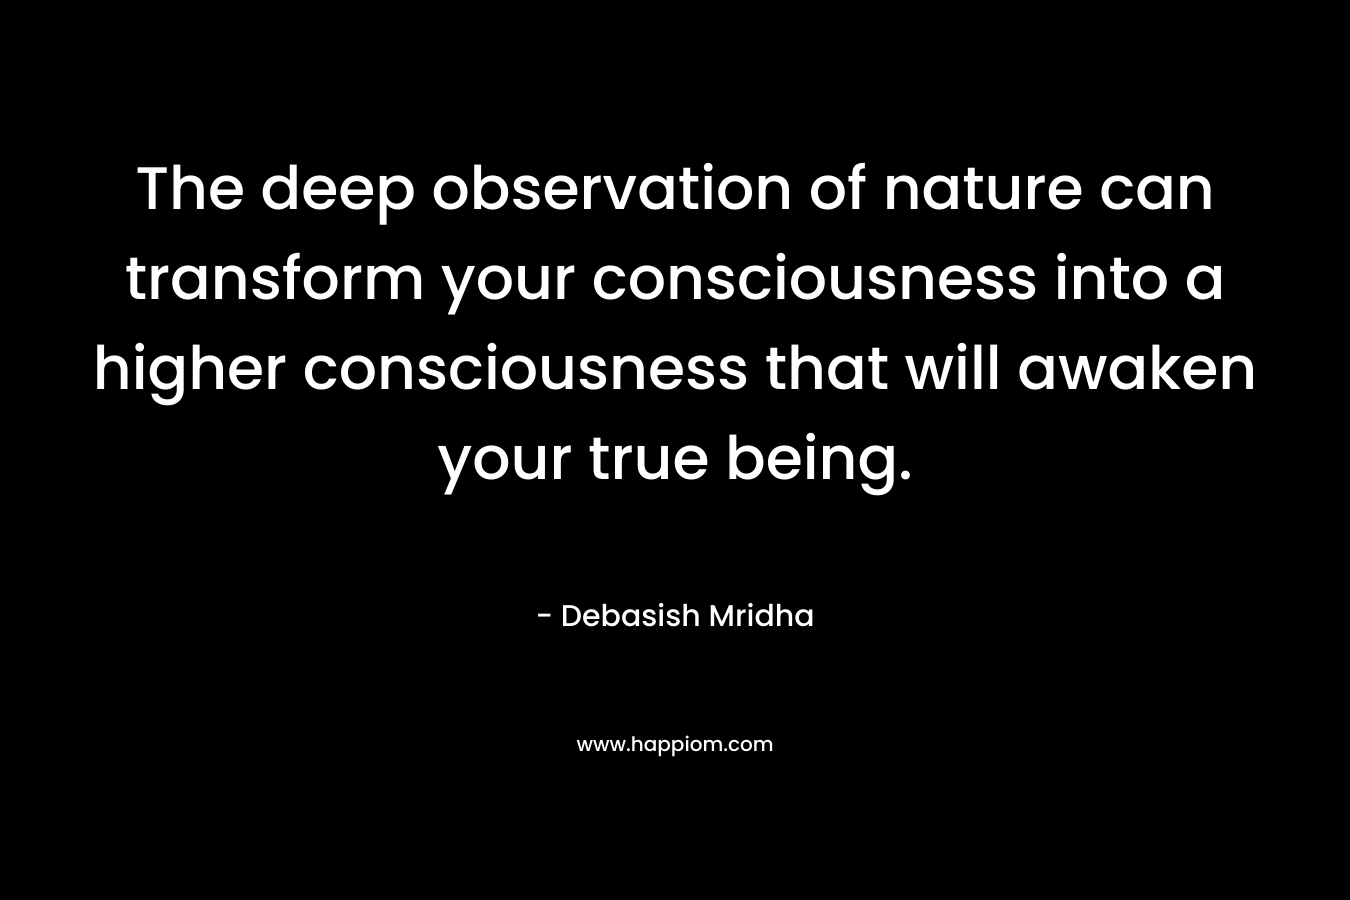 The deep observation of nature can transform your consciousness into a higher consciousness that will awaken your true being.